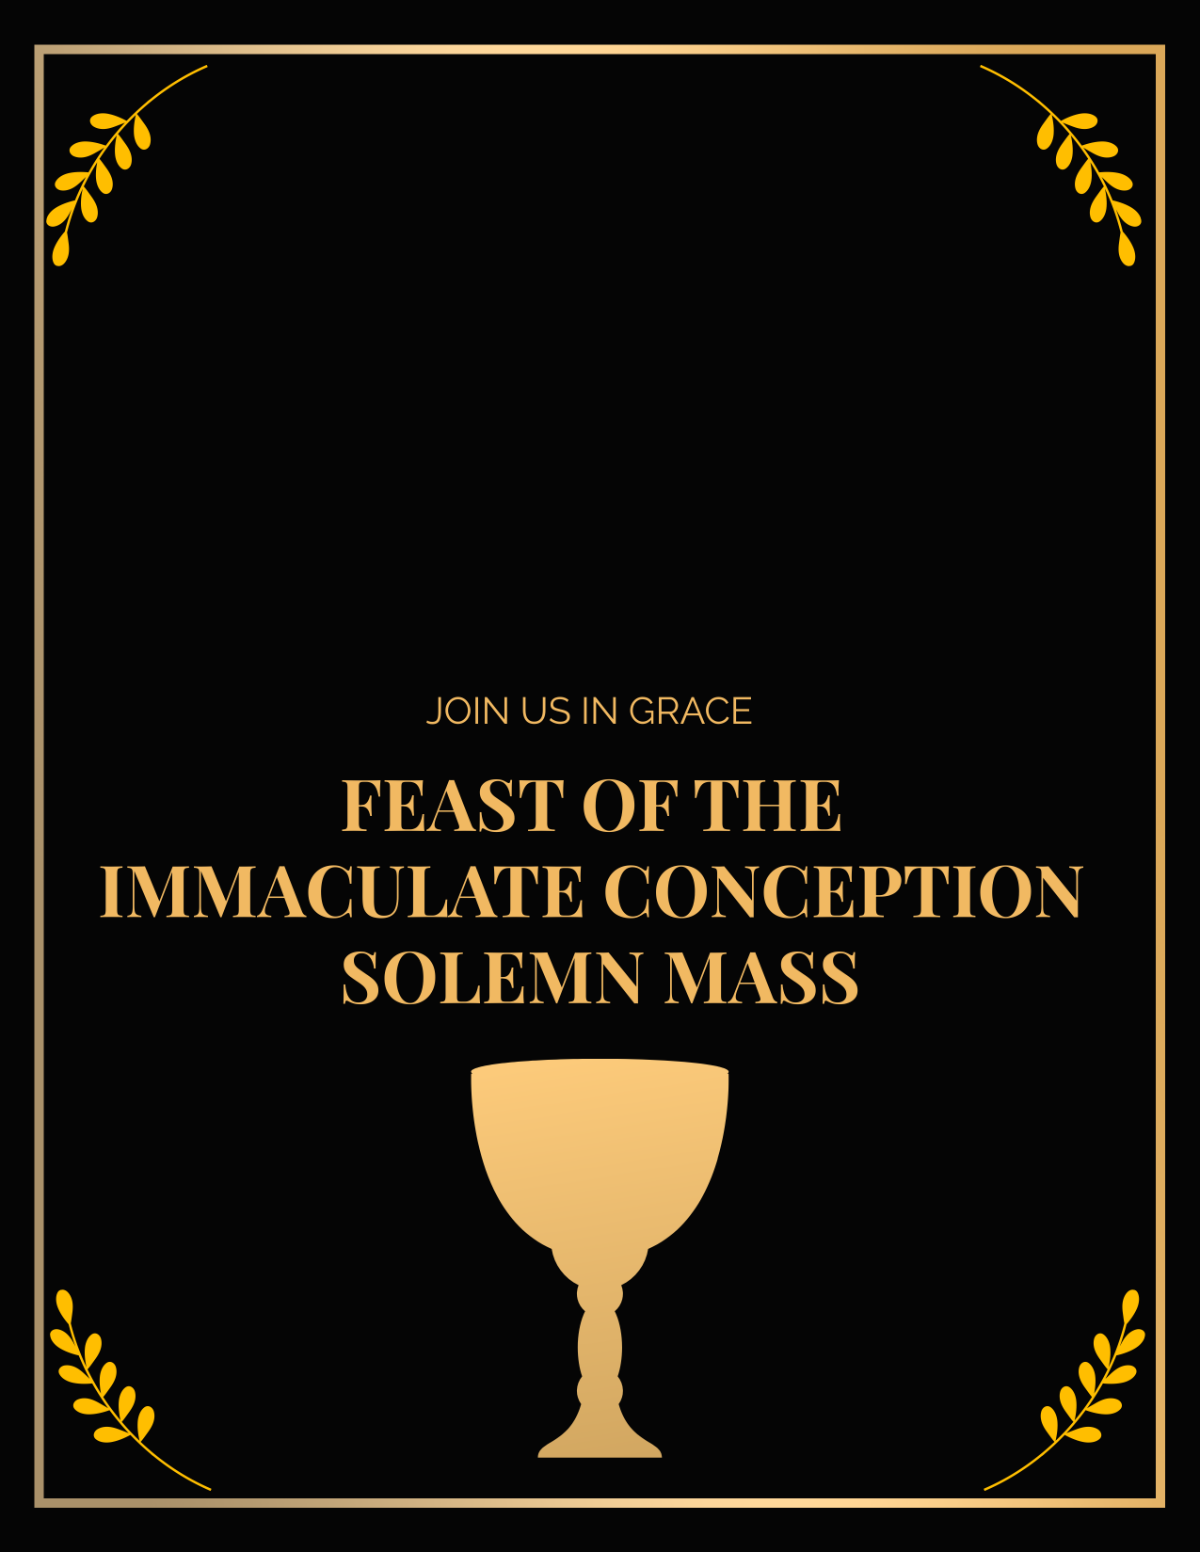 Free Feast of the Immaculate Conception Day Flyer Template